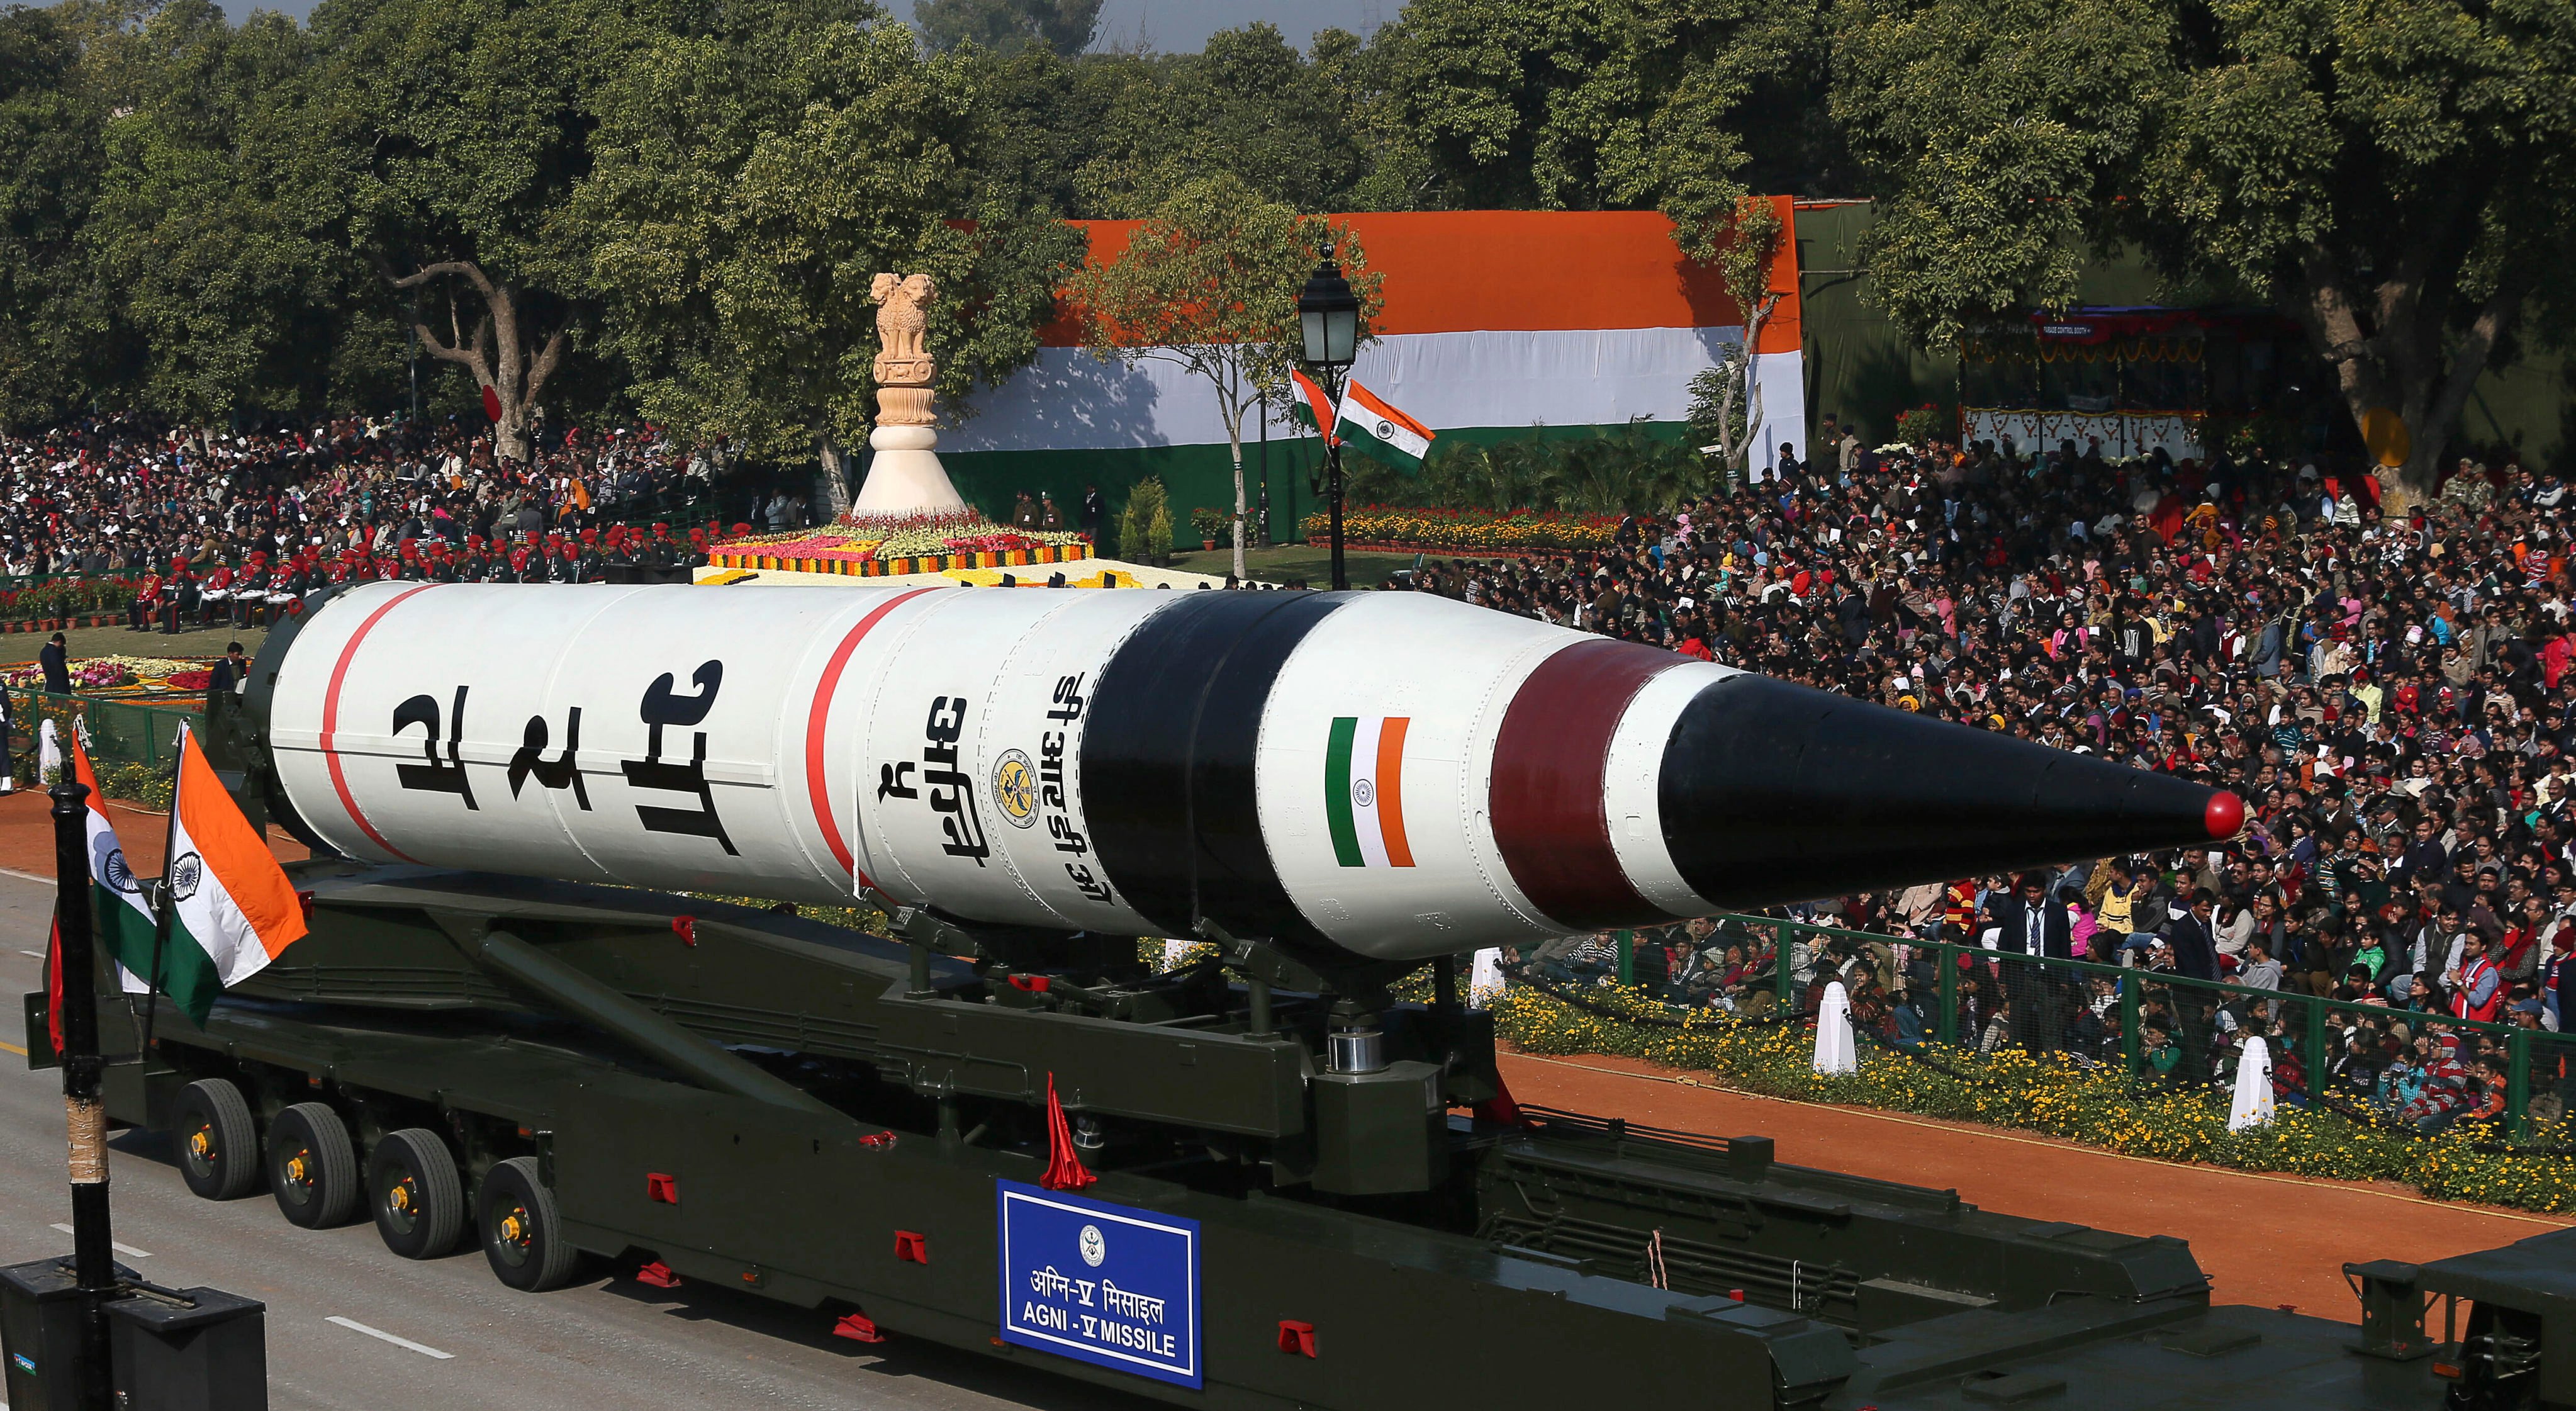 India’s long-range ballistic Agni-V missile is displayed during a Republic Day parade in New Delhi on January 26, 2013. India has successfully test-fired a nuclear-capable intercontinental ballistic missile and has pushed for further testing to verify its nuclear capabilities. Photo: AP